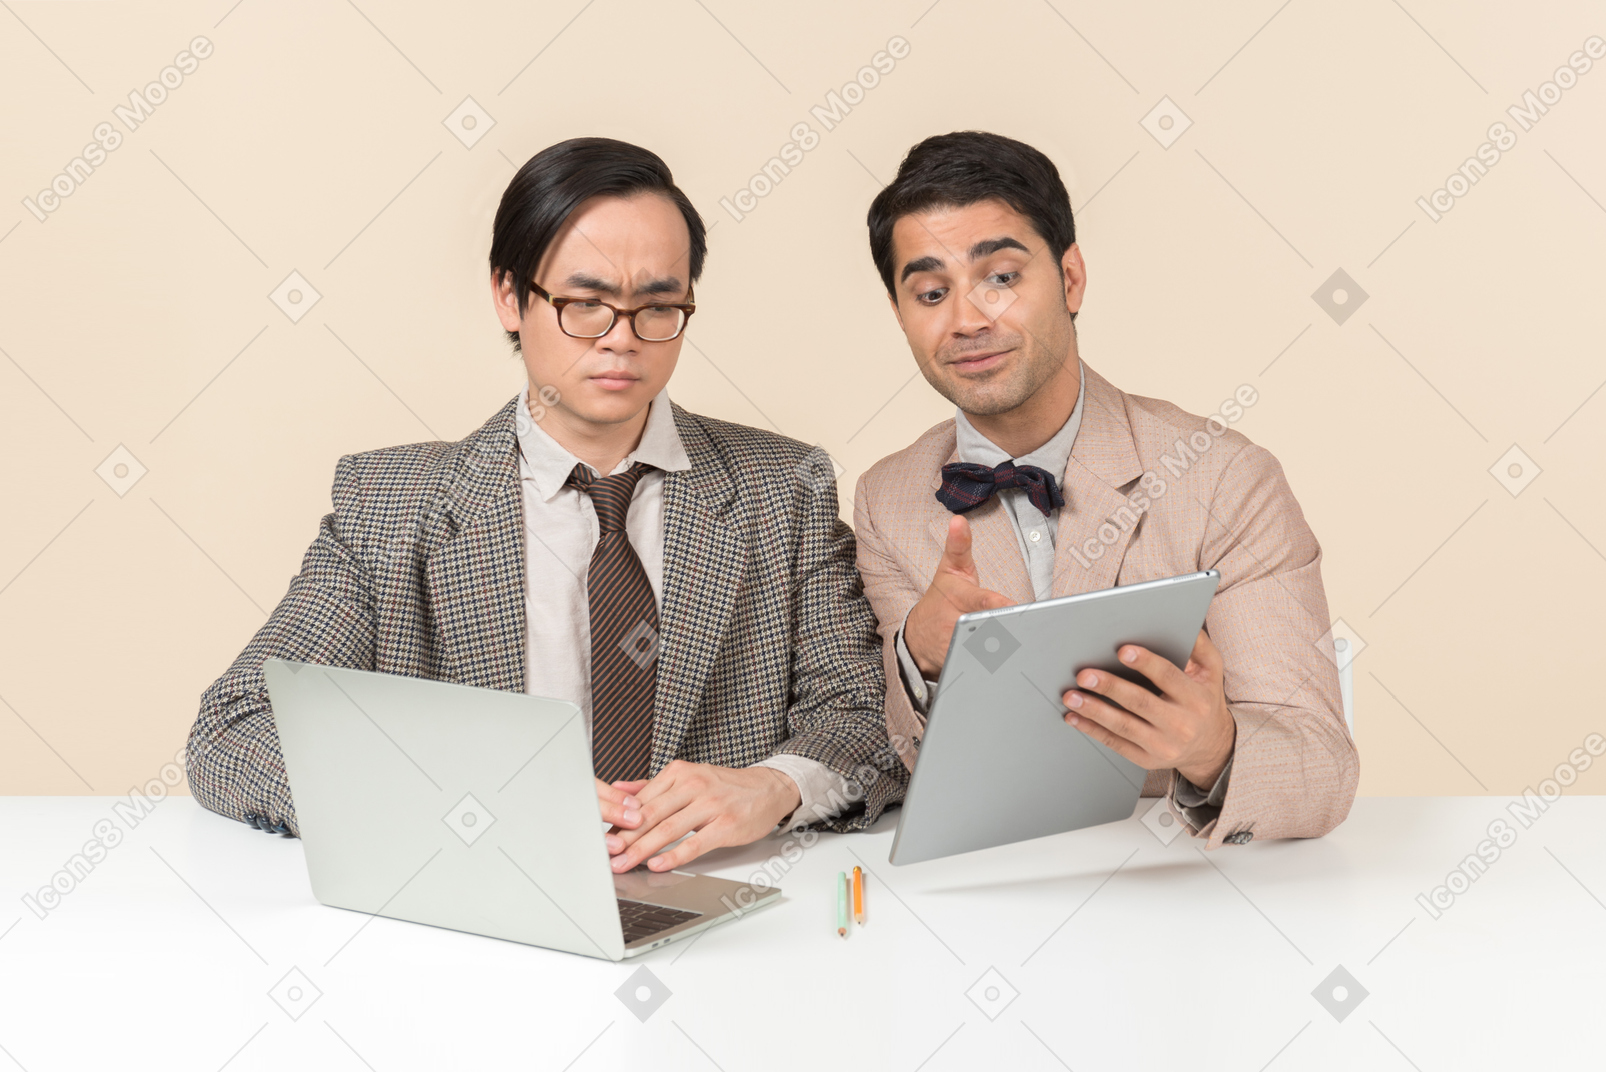 Two young nerds sitting at the table and using gadgets